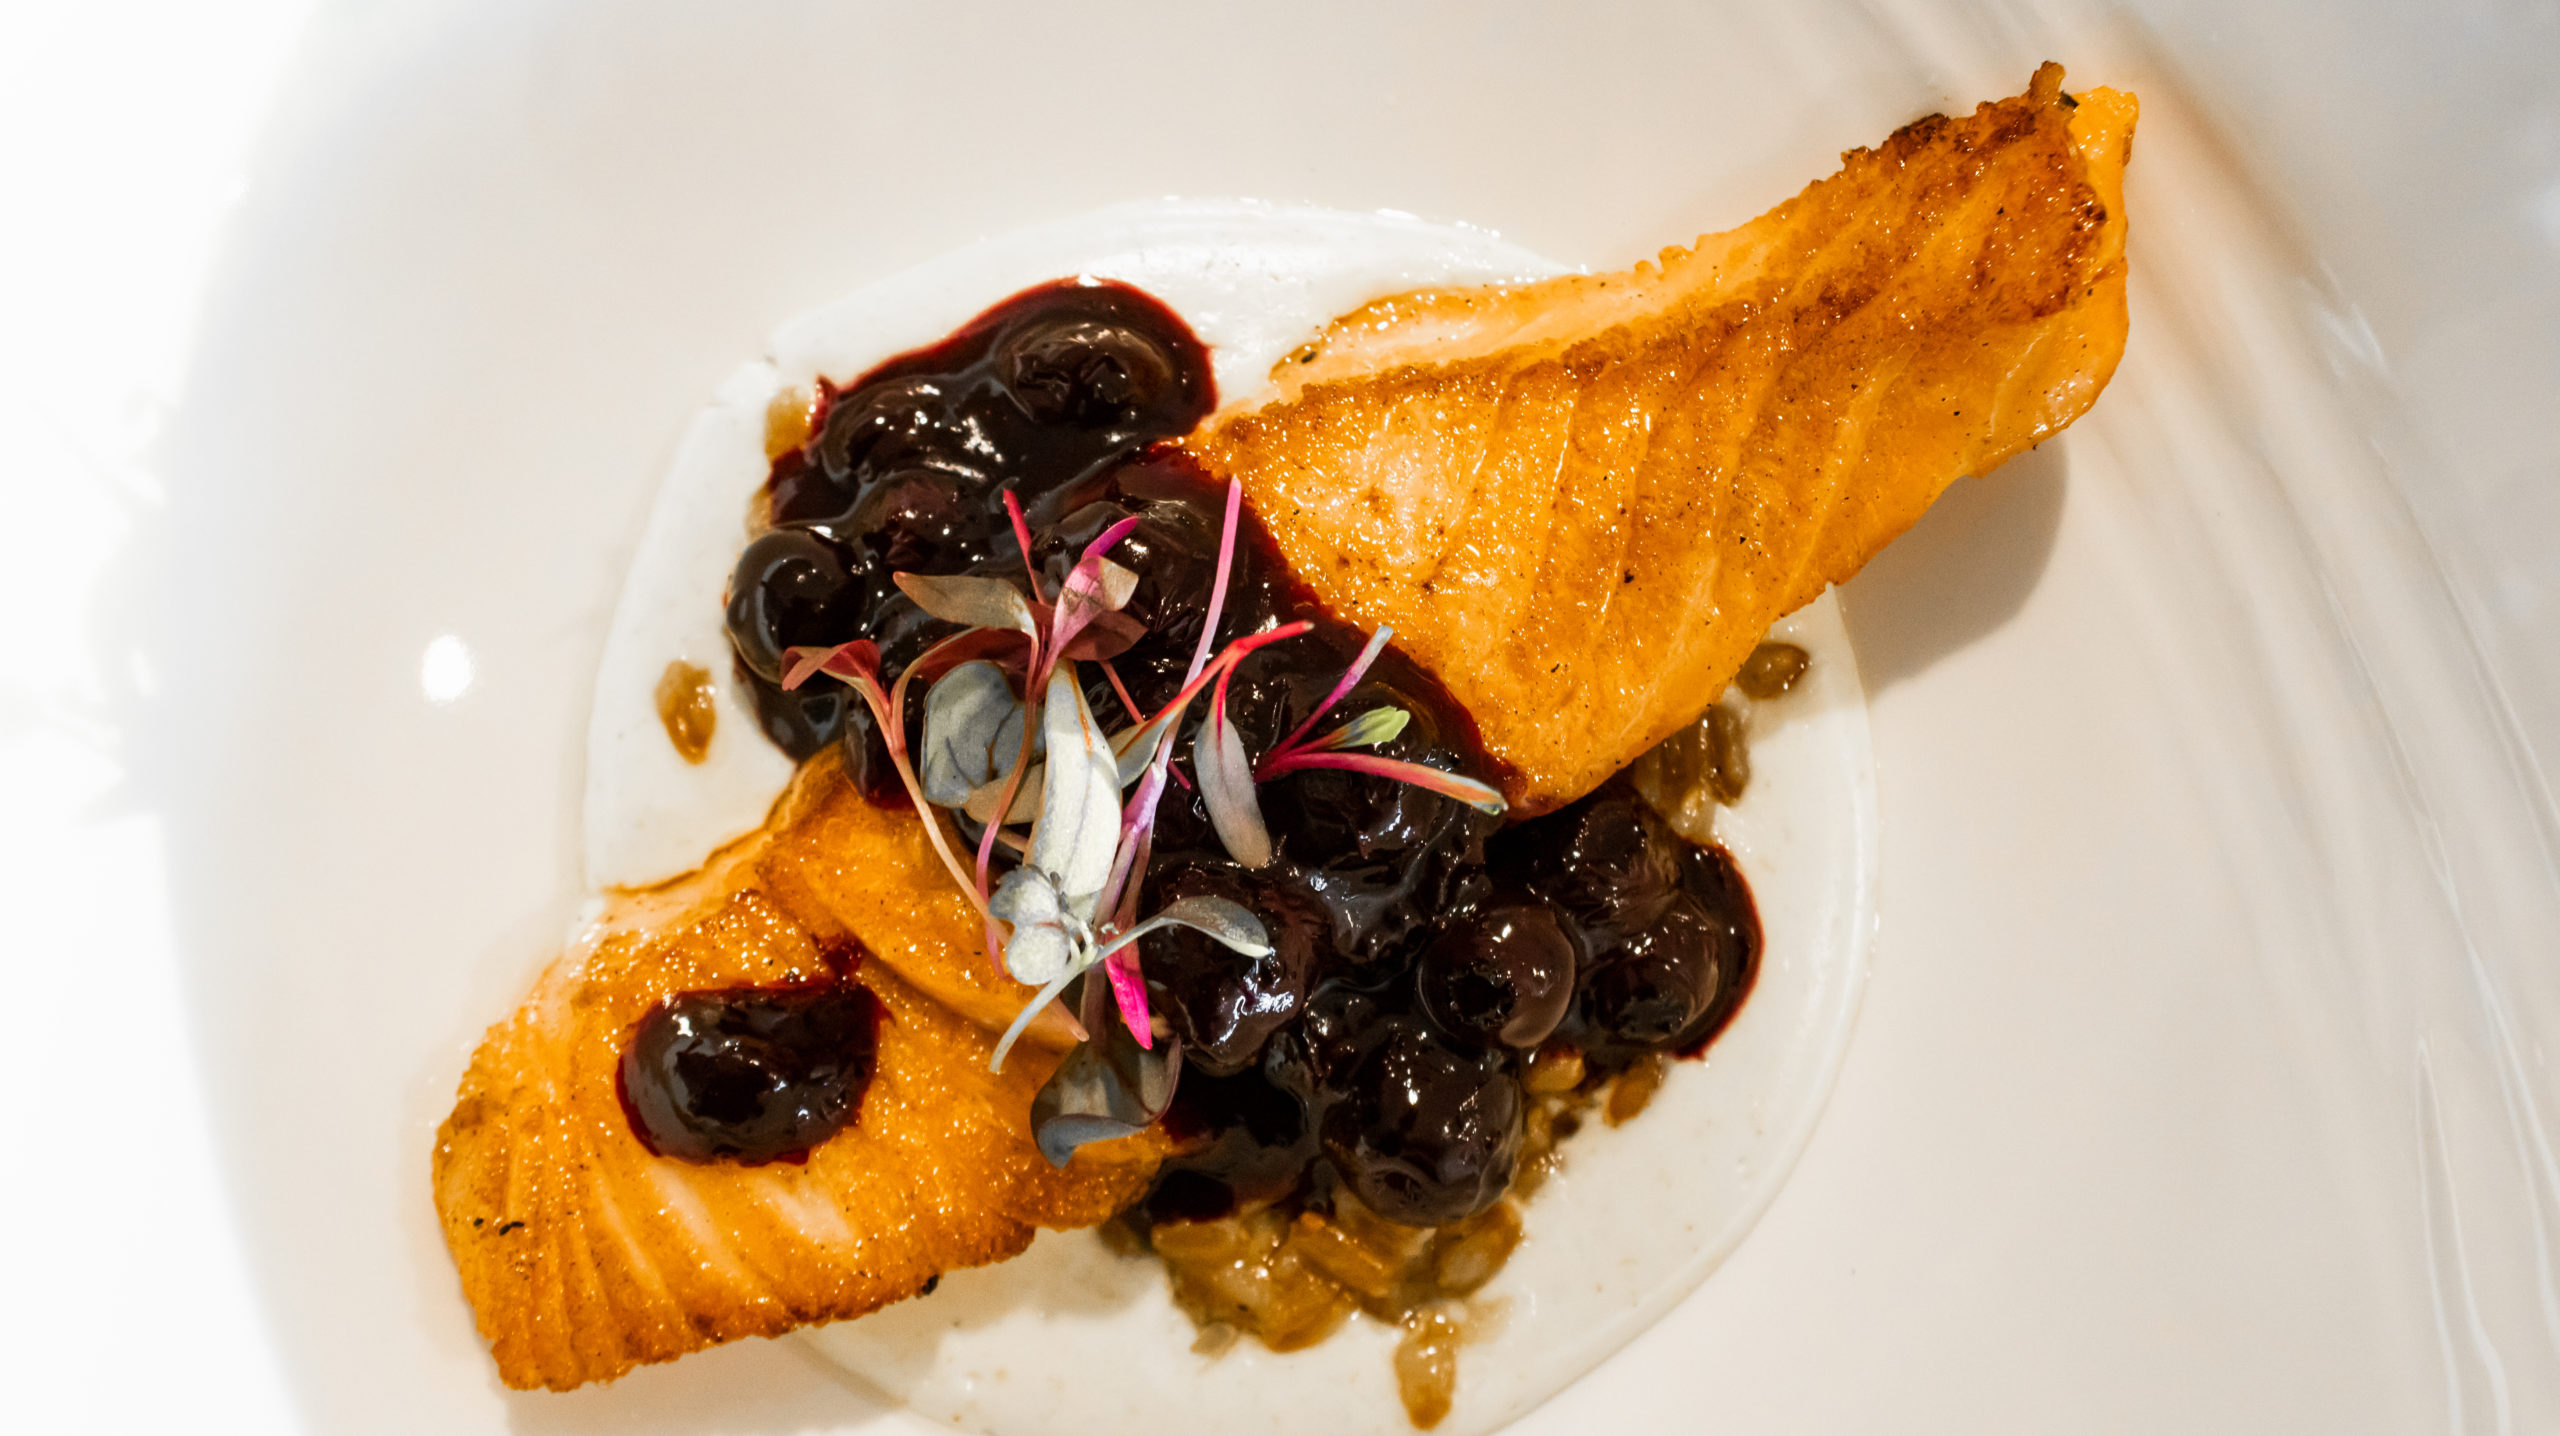 Pickled Blueberry Compote on Loch Duart Salmon